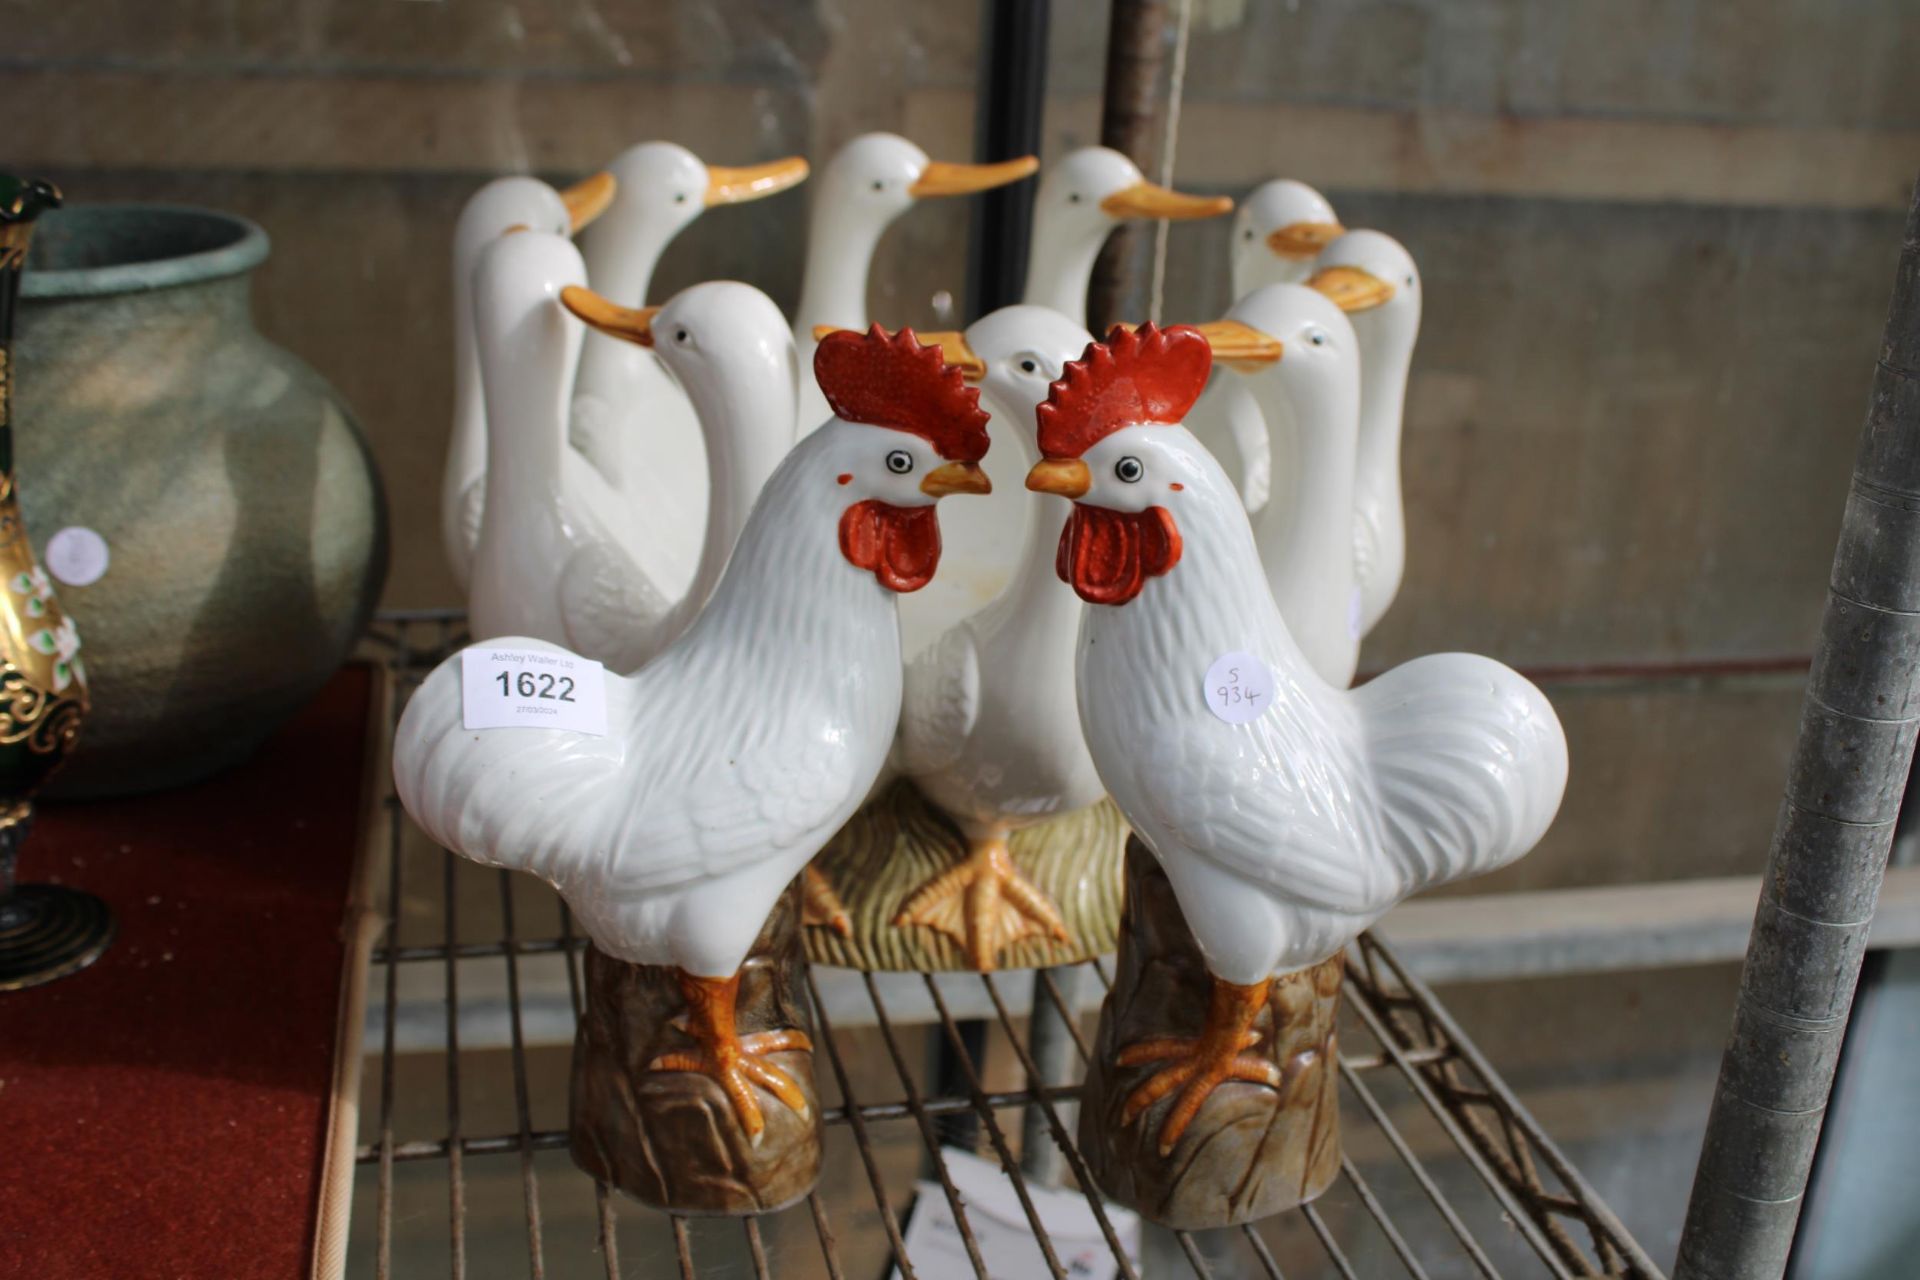 A LARGE CERAMIC DUCK BOWL AND TWO CERAMIC CHICKENS